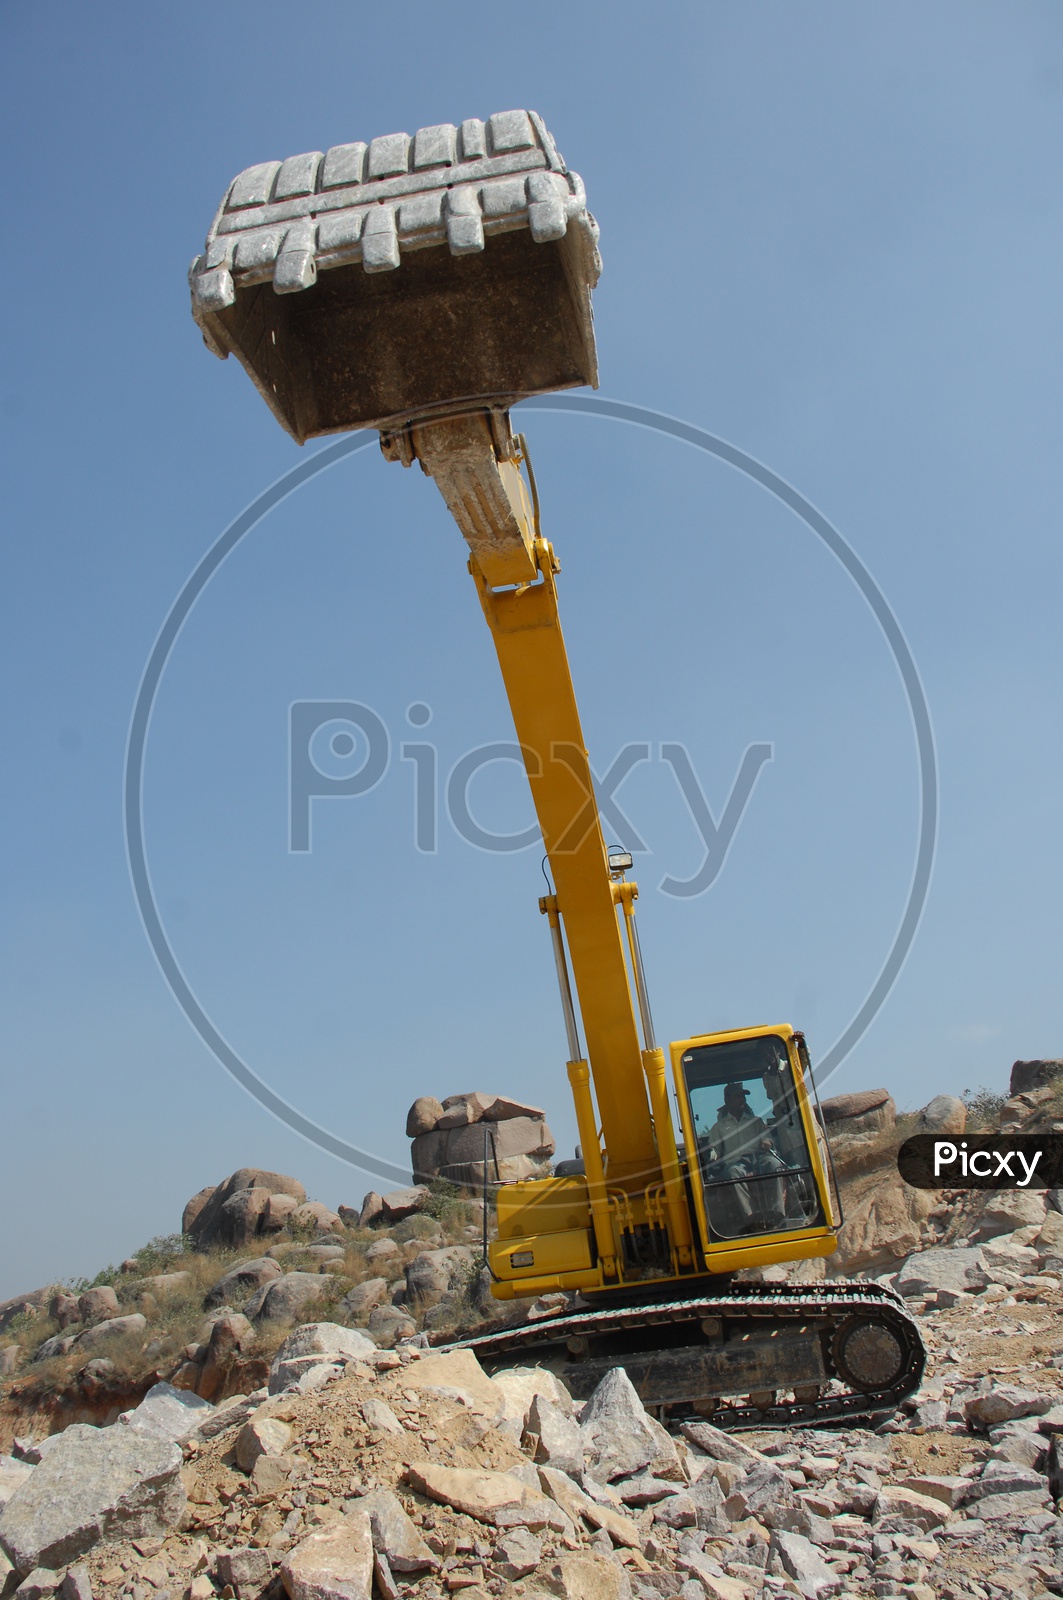 Bucket of the bulldozer excavating the rocks at a construction site